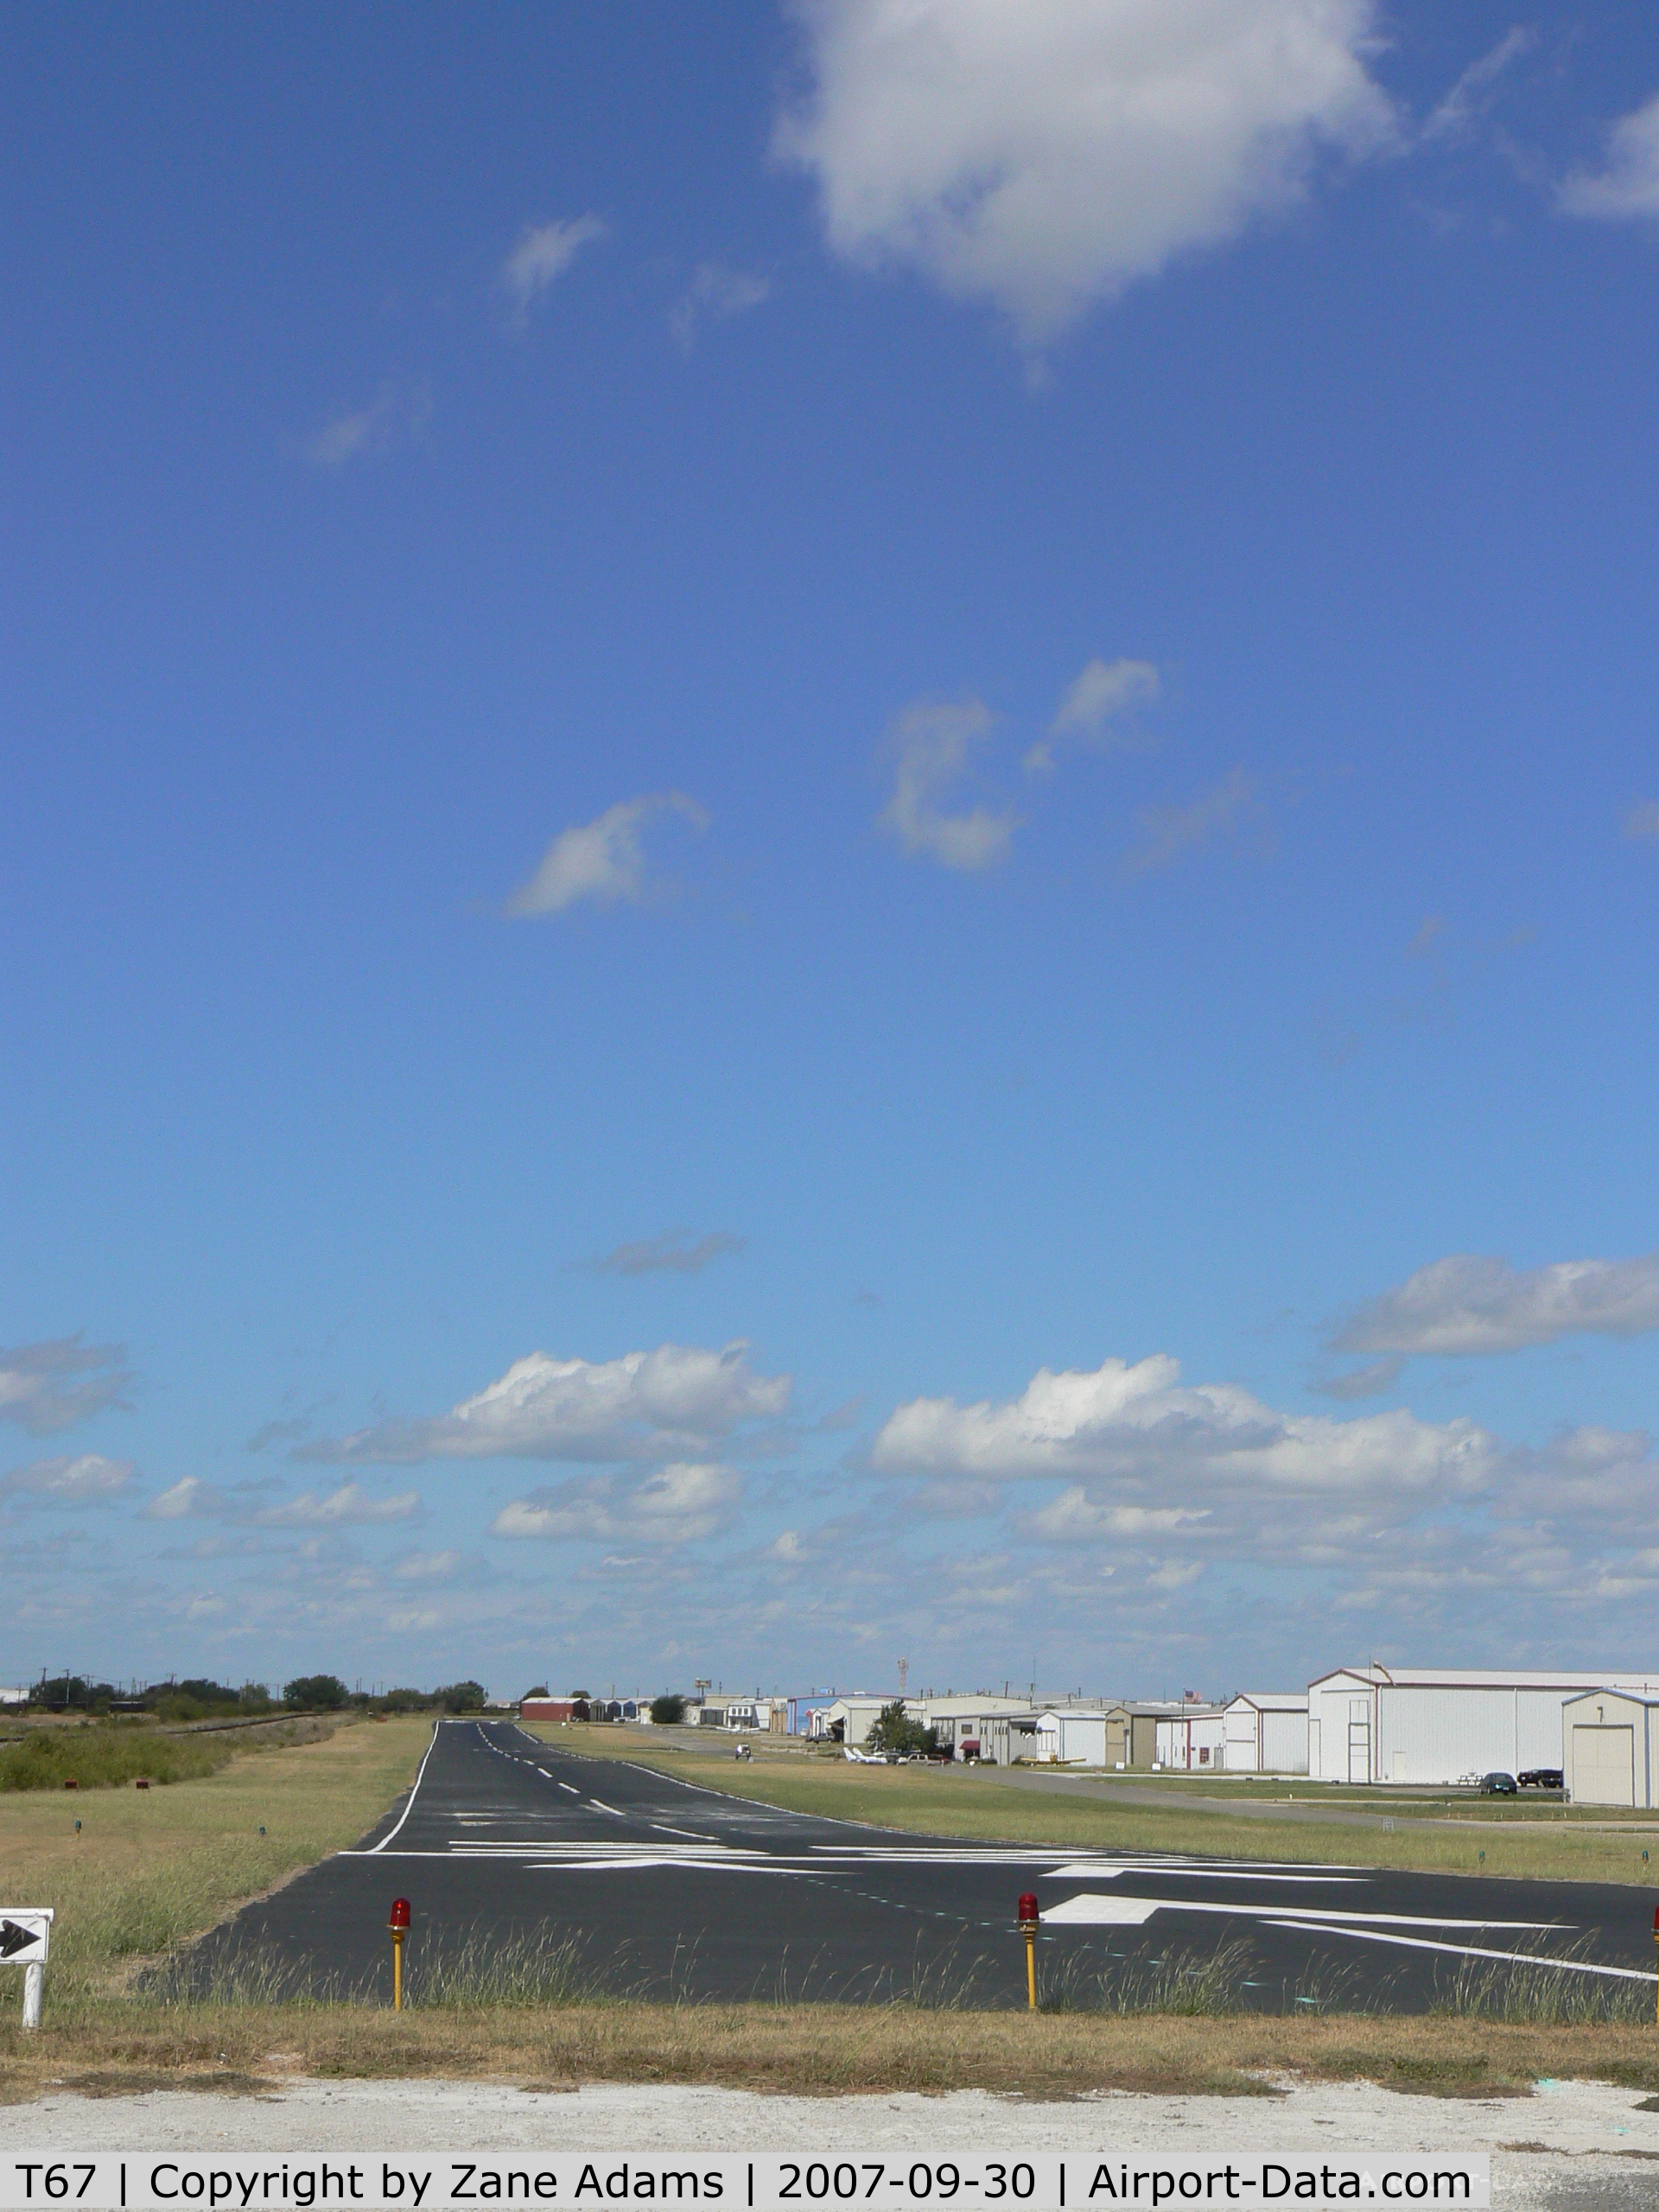 Hicks Airfield Airport (T67) - Hicks Field - Ft. Worth, TX